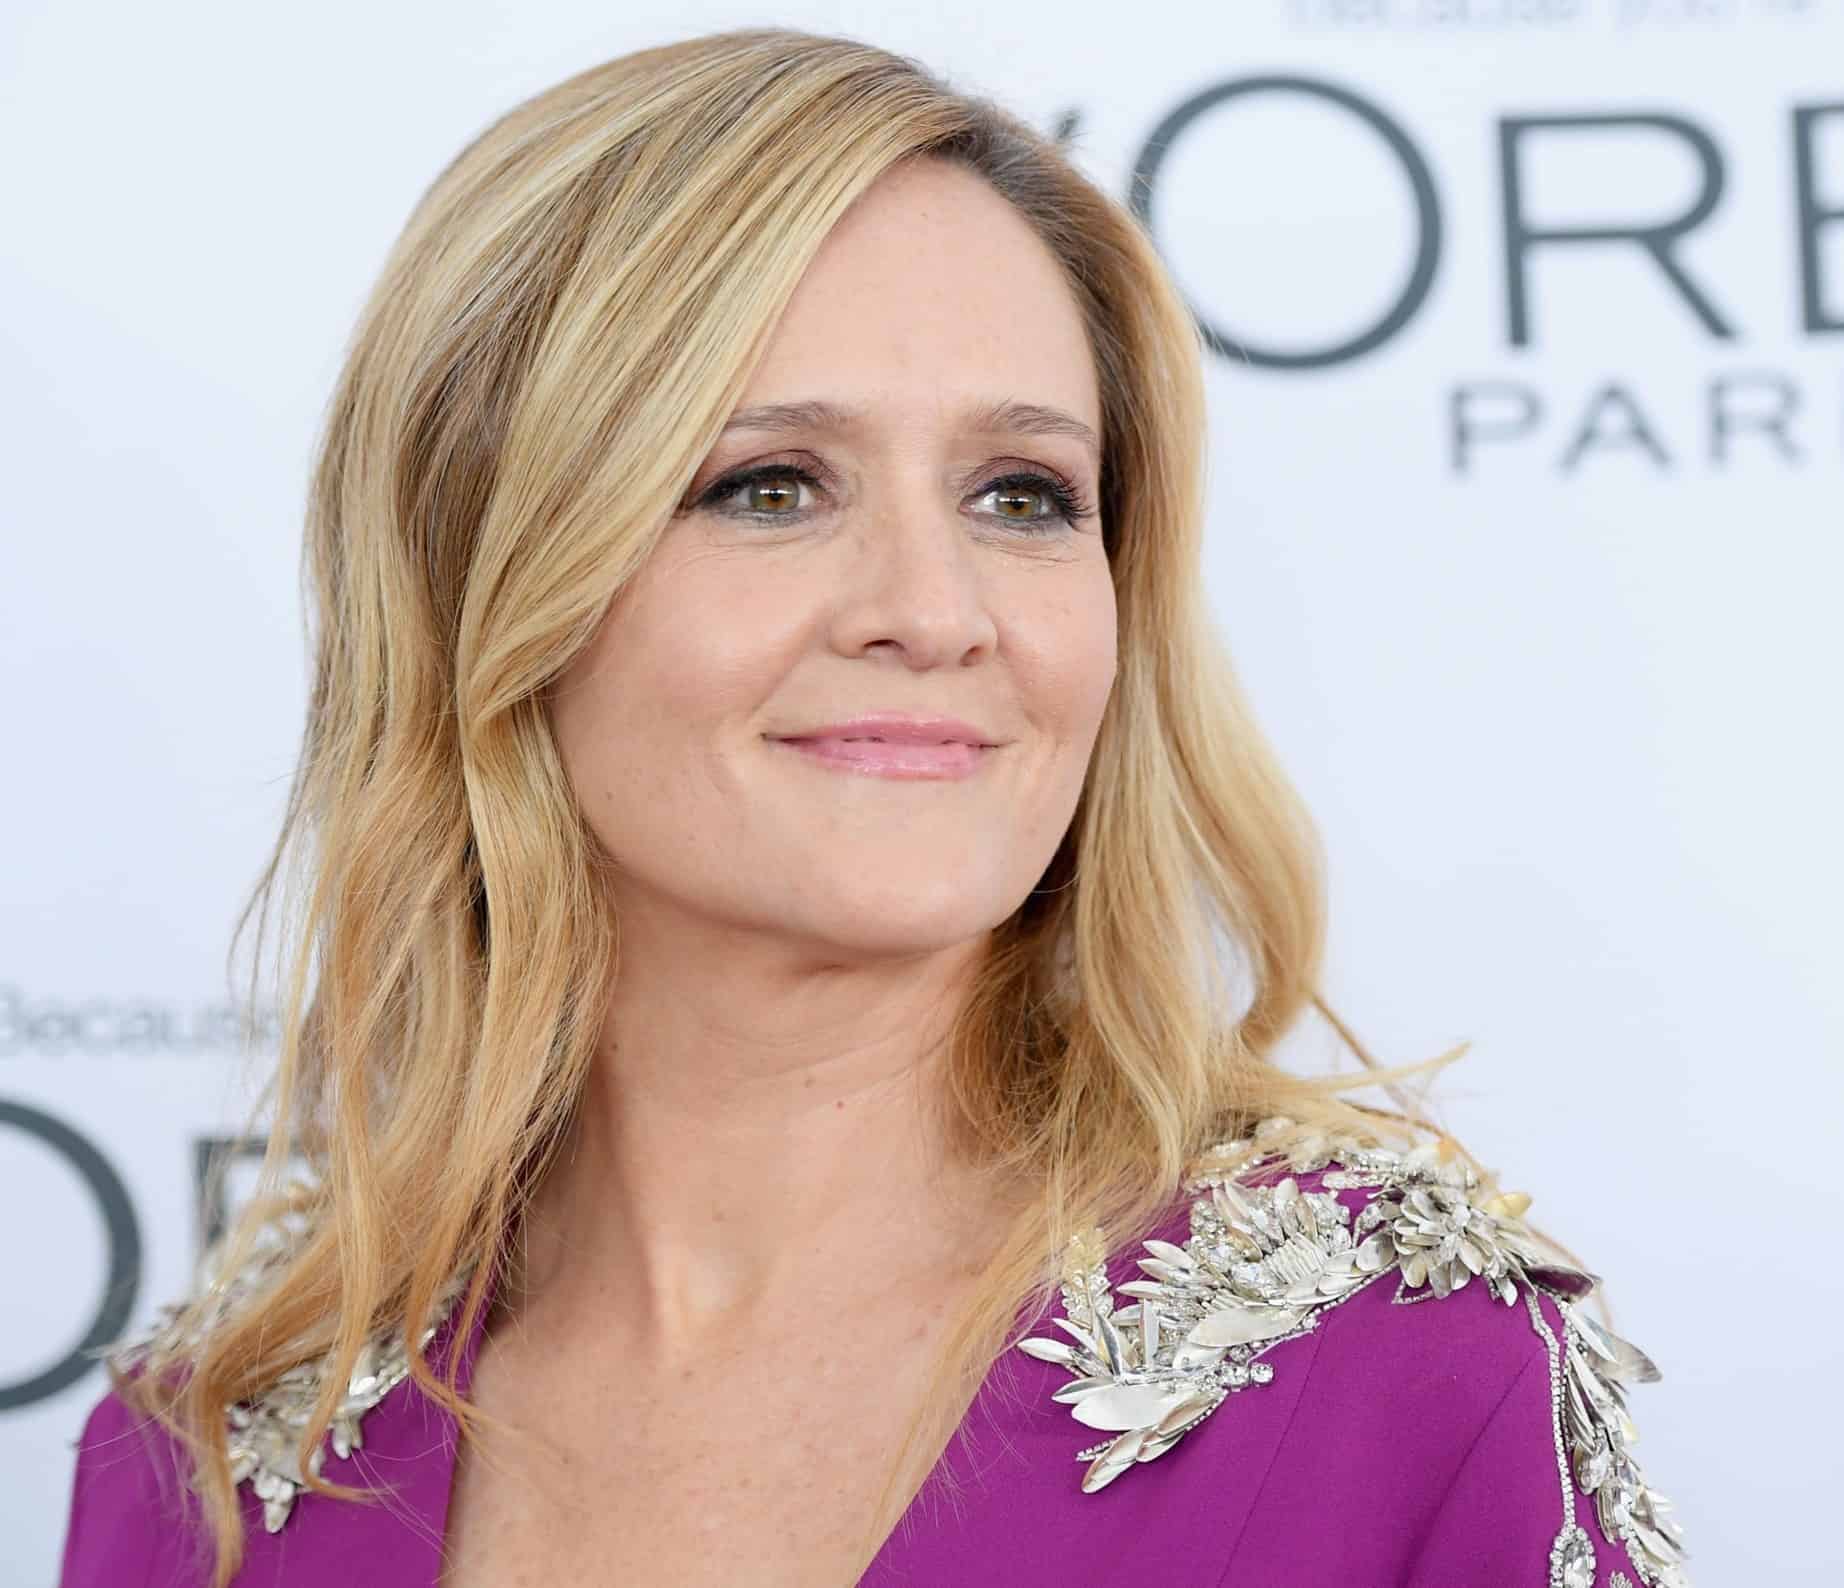 Samantha Bee and her husband, Jason Jones, purchased a two-unit co-op in Manhattan for $3.7 million